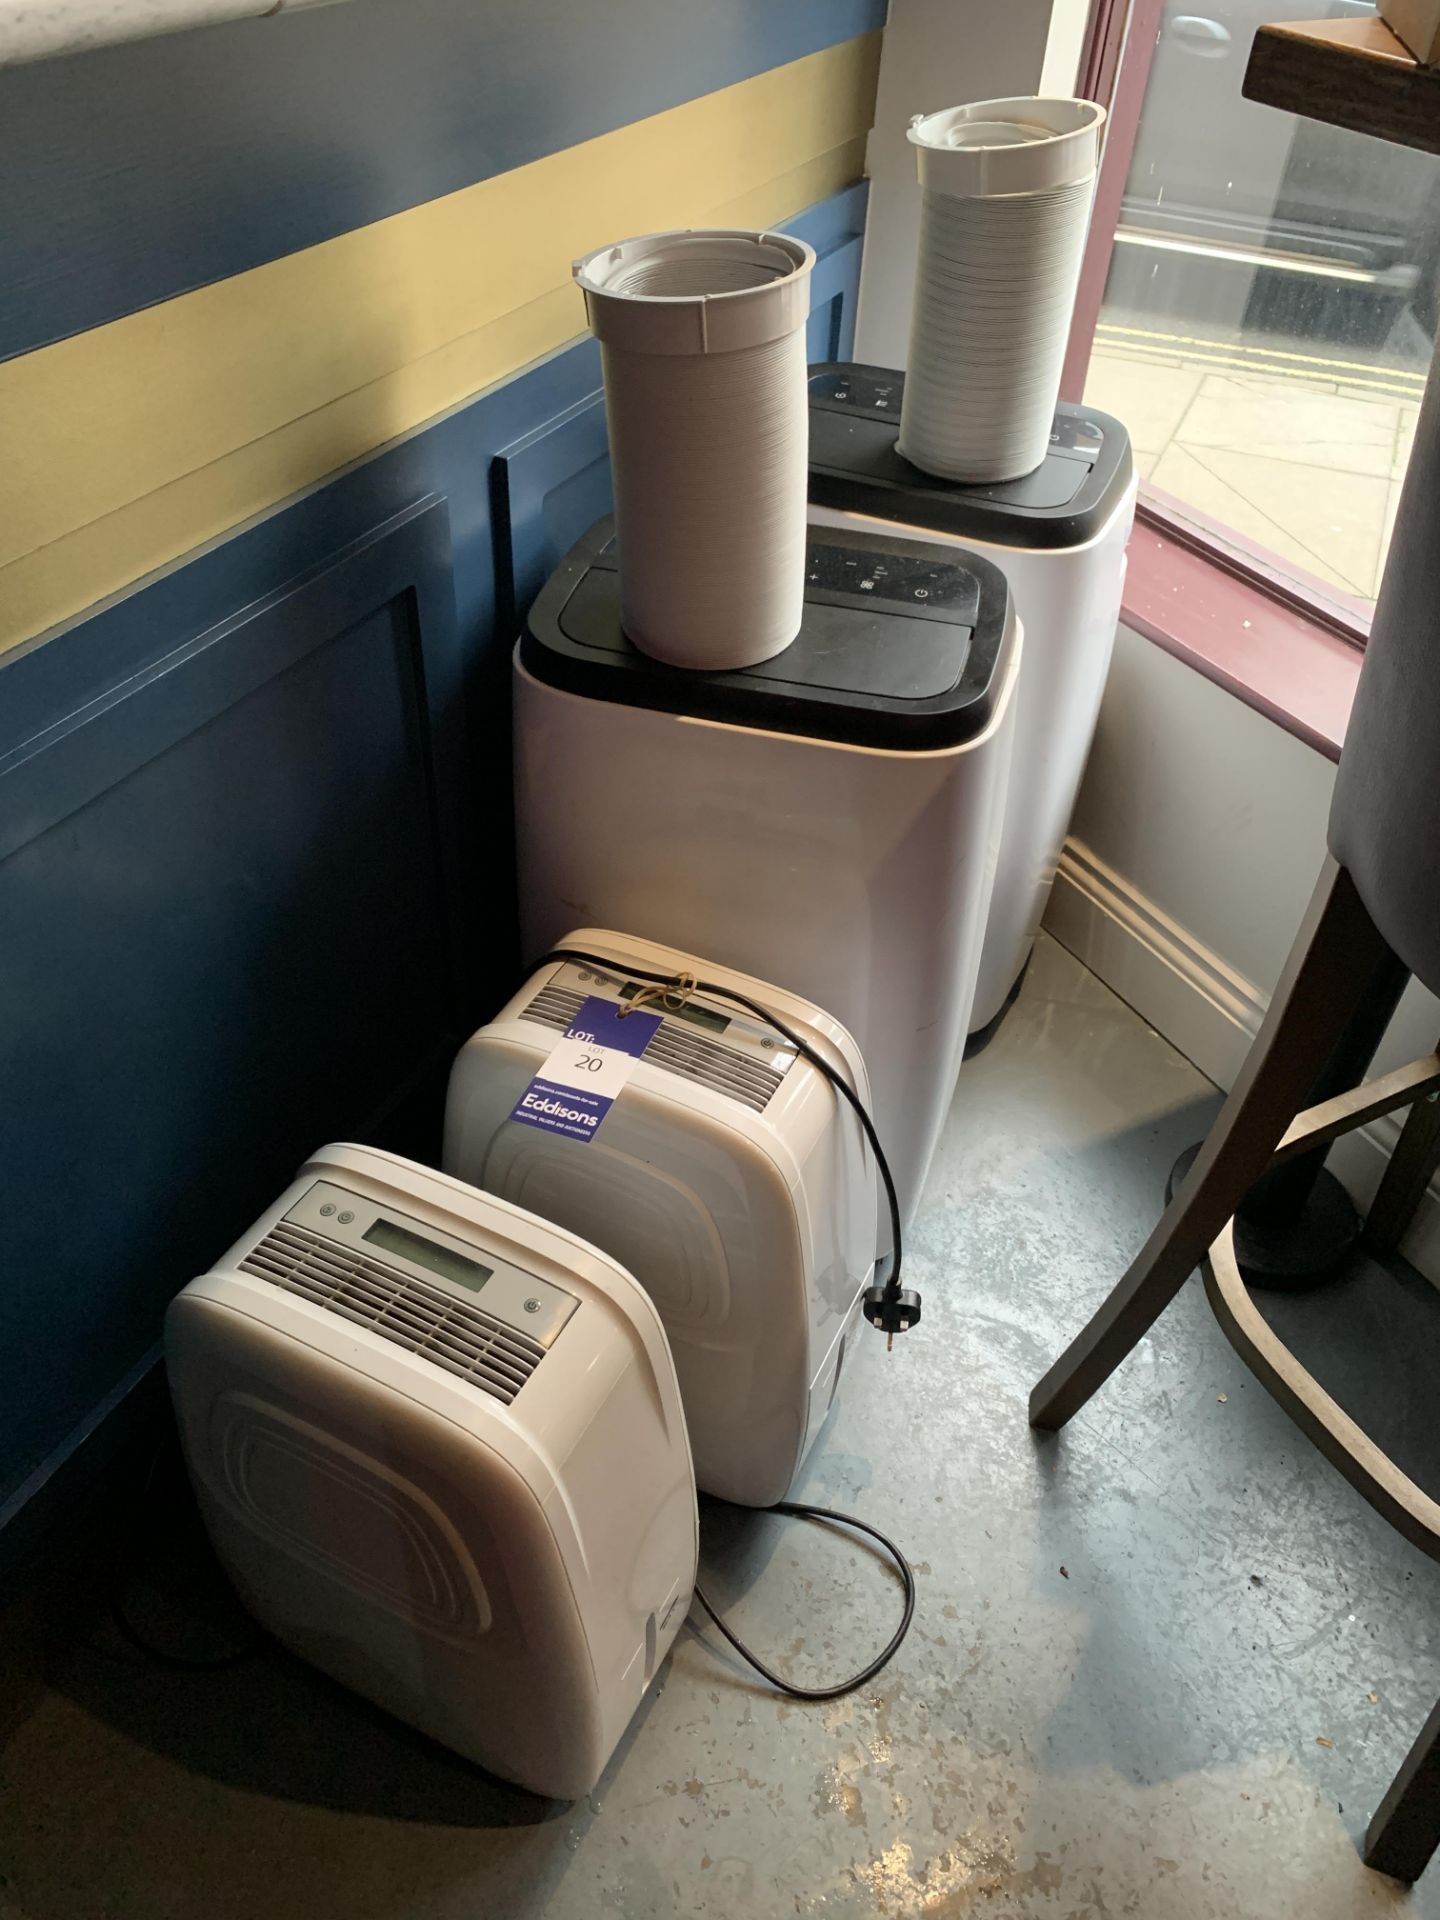 2x Princess Mobile Air Conditioning/Dehumidifying Units and 2x Other Aircon Units